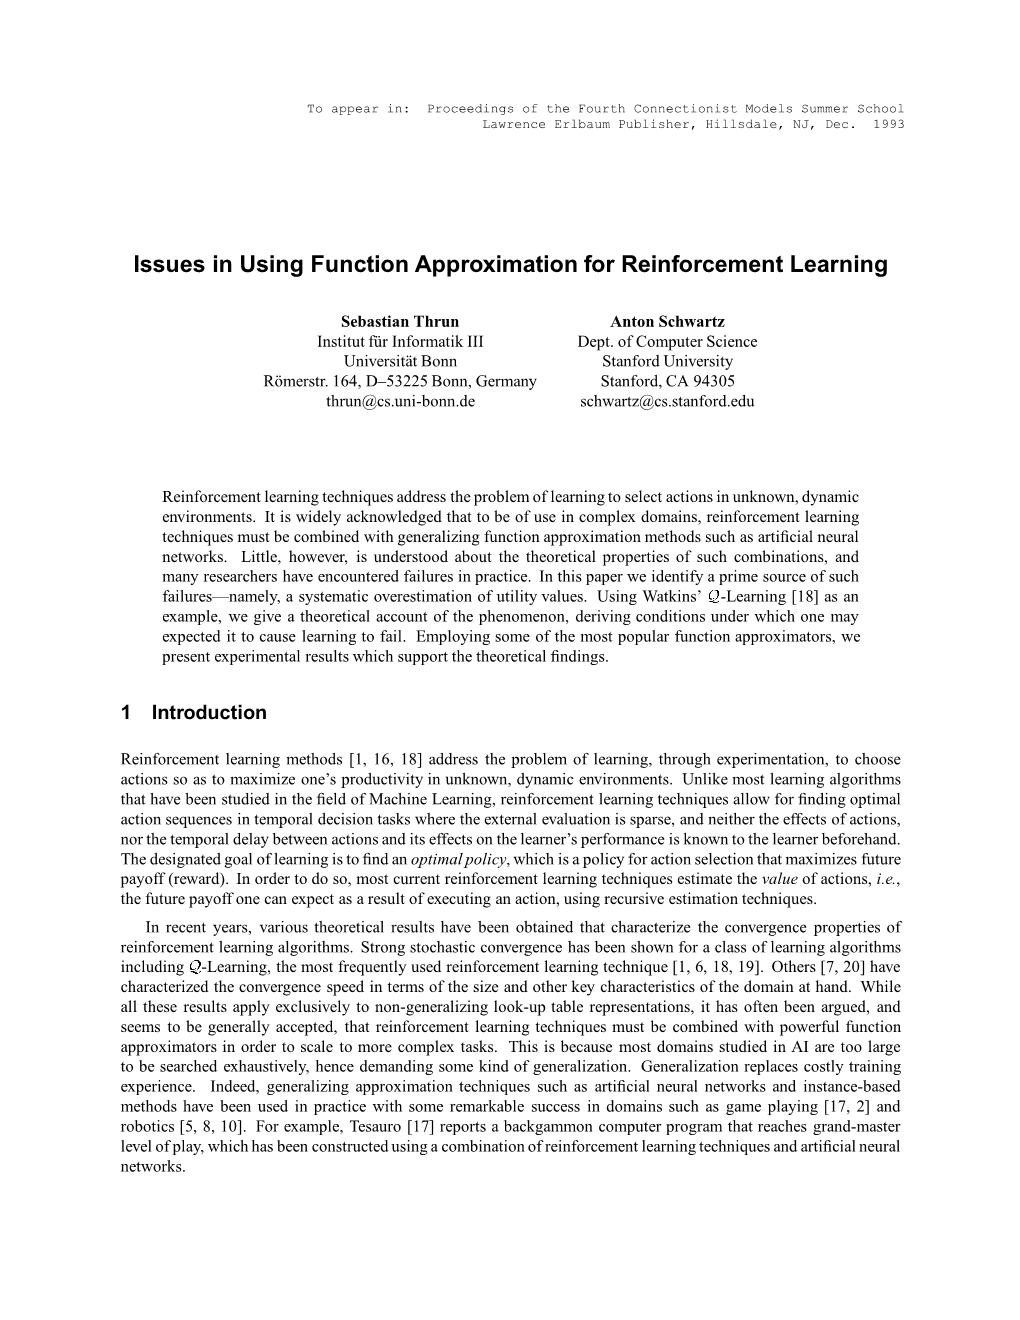 Issues in Using Function Approximation for Reinforcement Learning